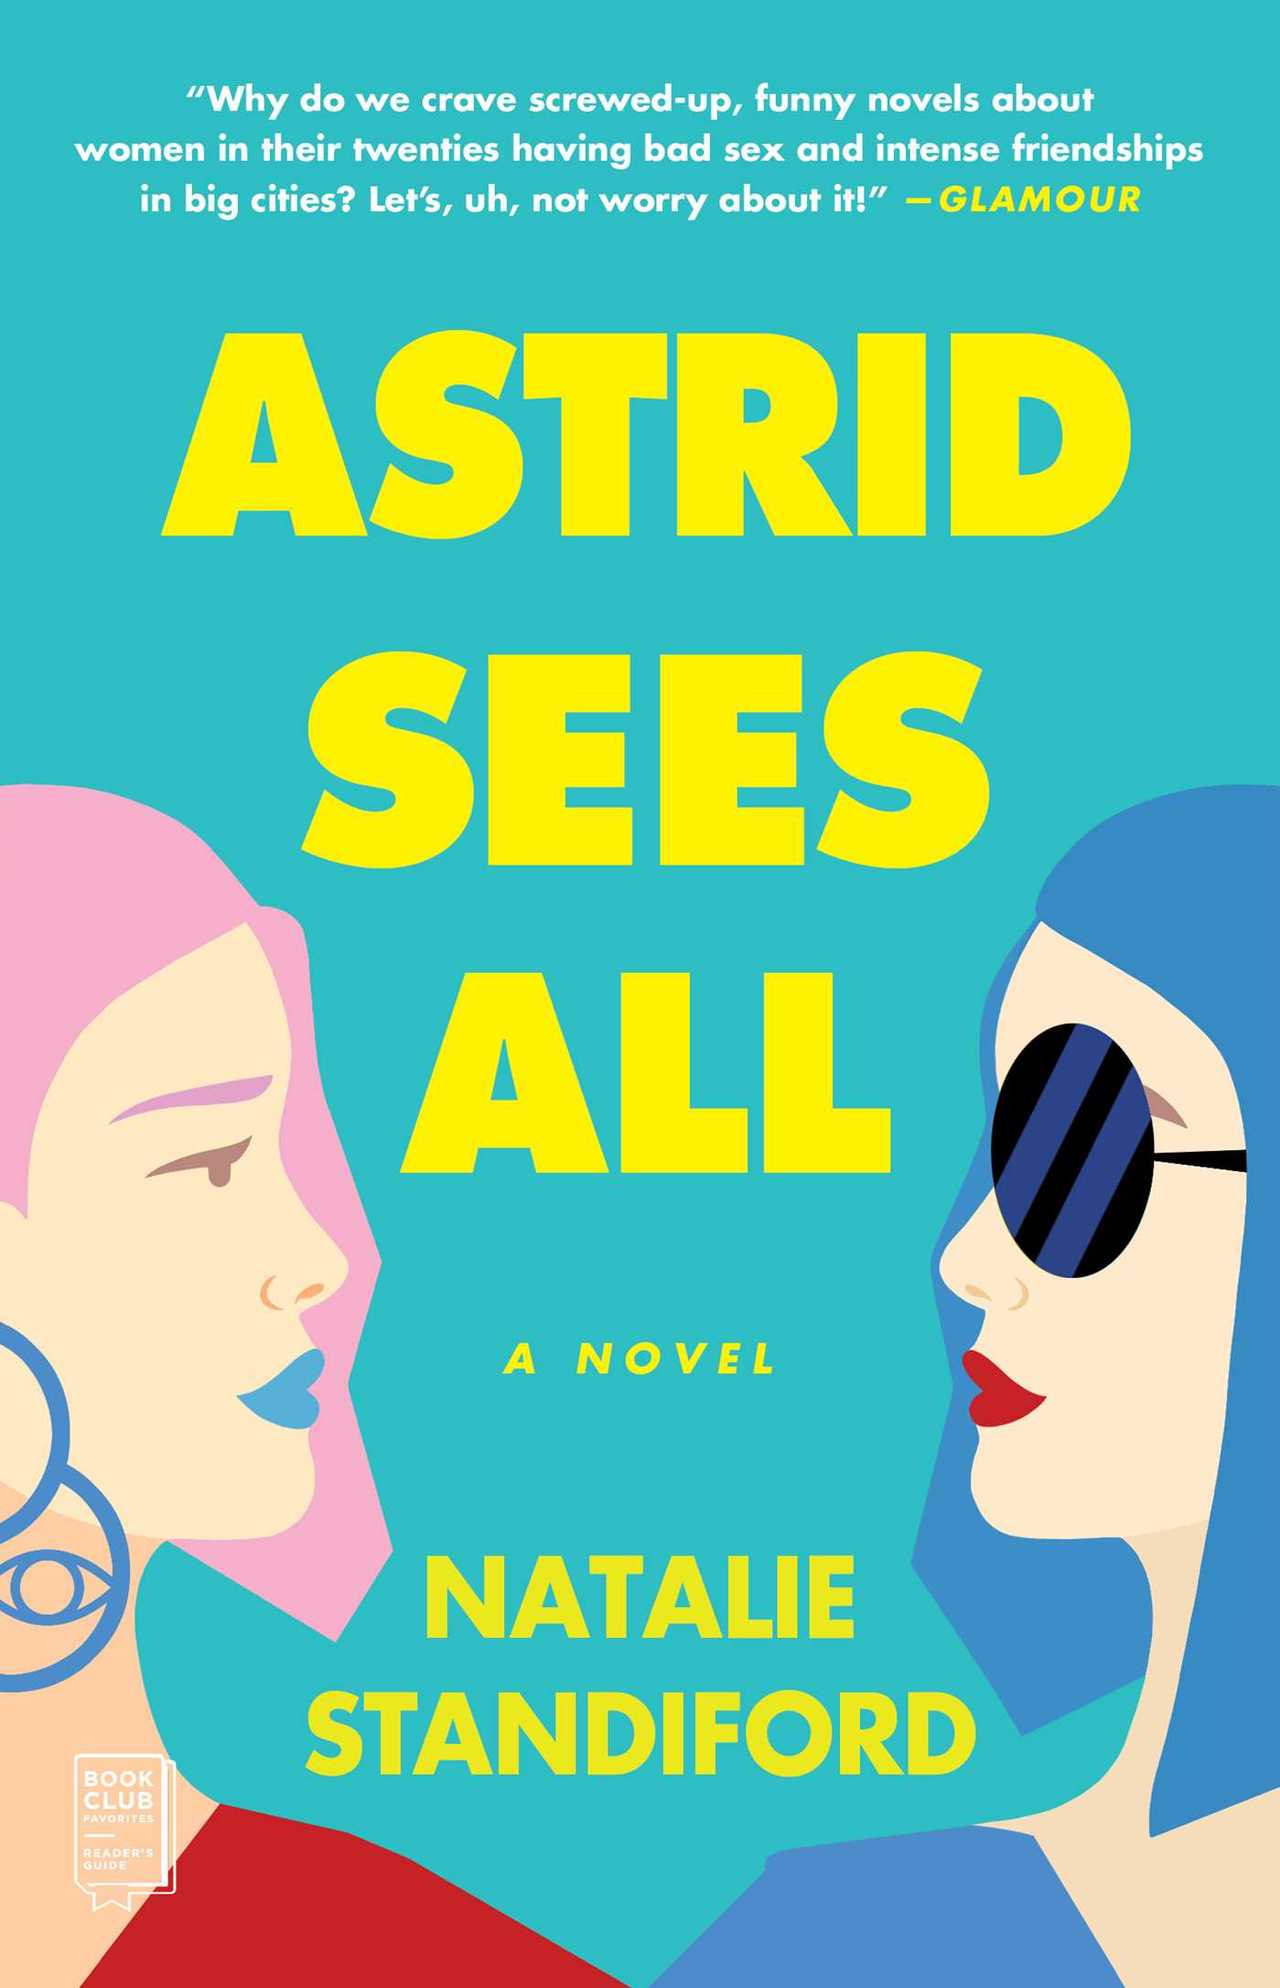 The paperback cover of ASTRID SEES ALL: A NOVEL by Natalie Standiford. Blurb reads "Why do we crave screwed-up, funny novels about women in their twenties having bad sex and intense friendships in big cities? Let's, uh, not worry about it!"-Glamour